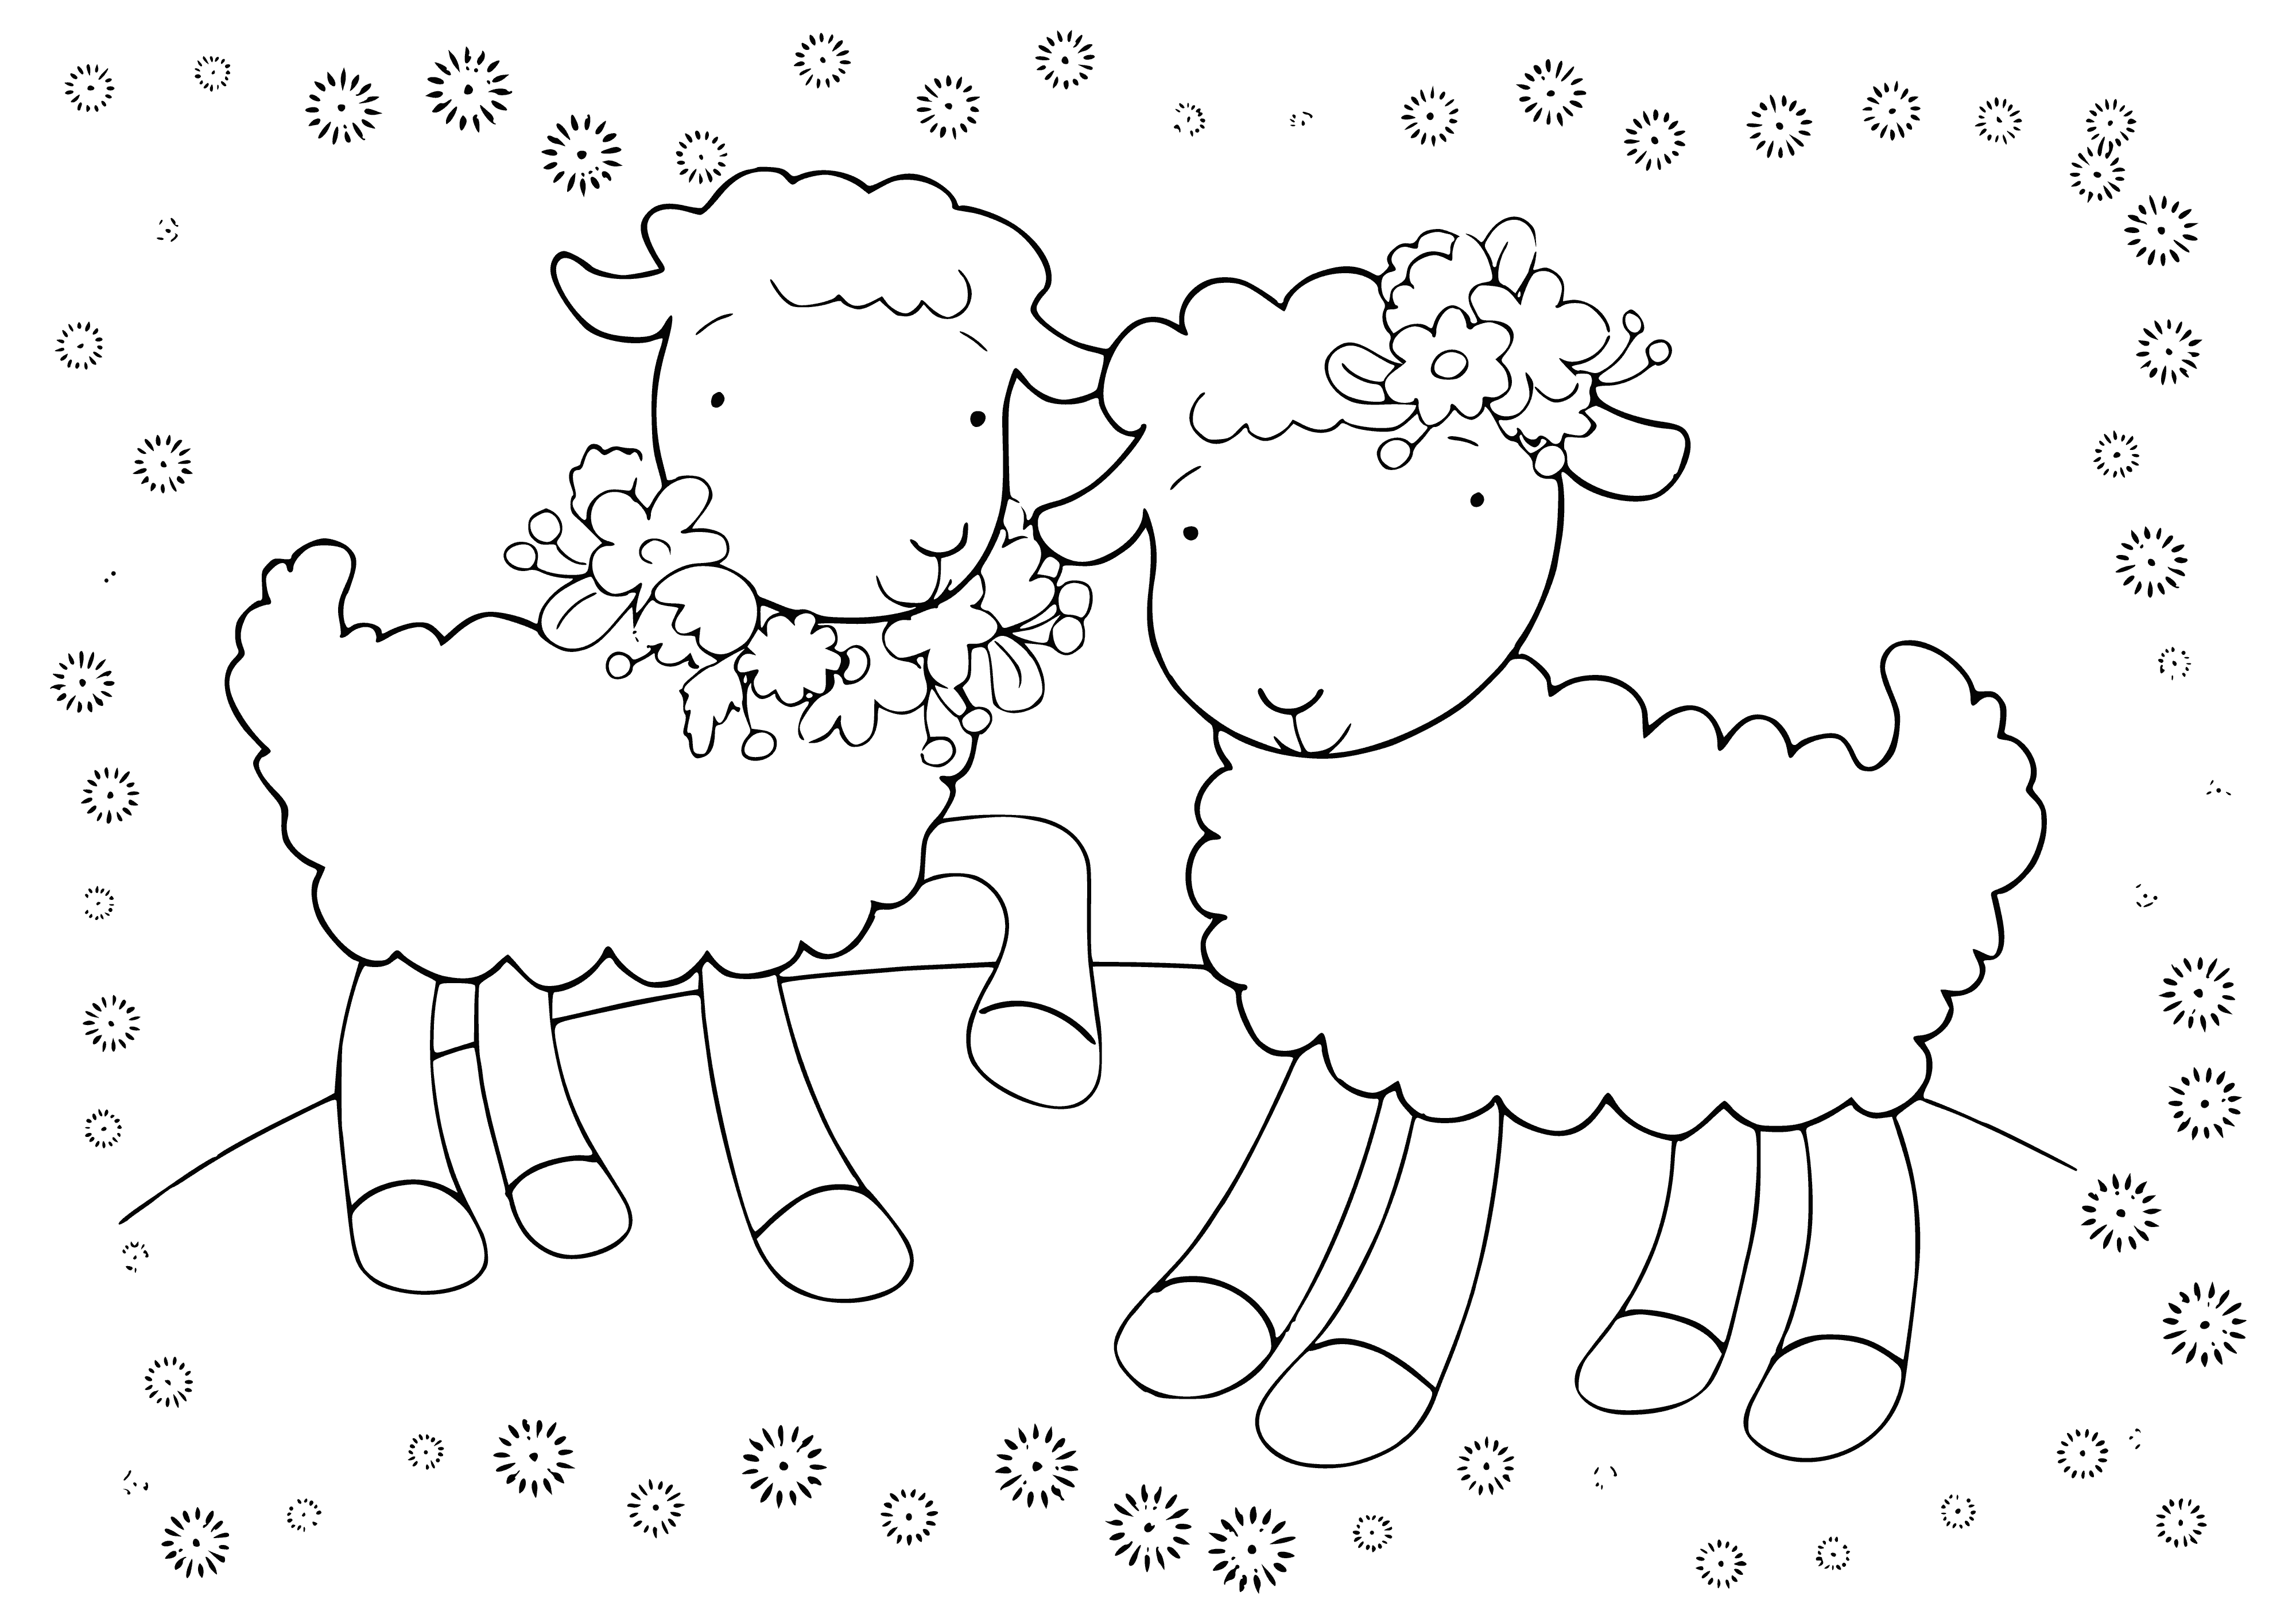 Smart sheep coloring page